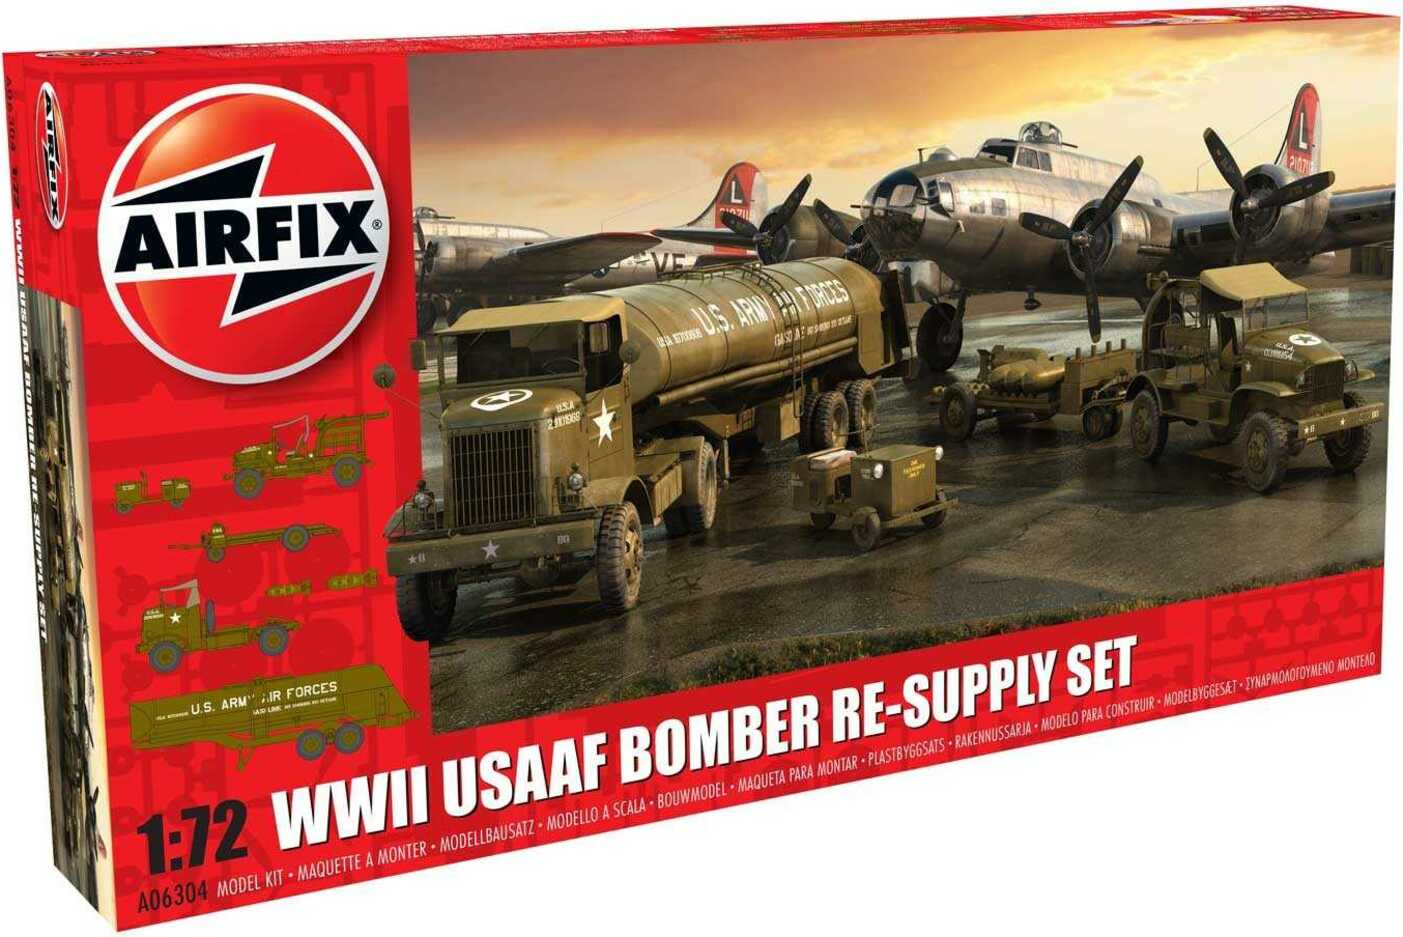 Classic Kit Diorama A06304 - USAAF 8TH Airforce Bomber Resupply Set (1:72)